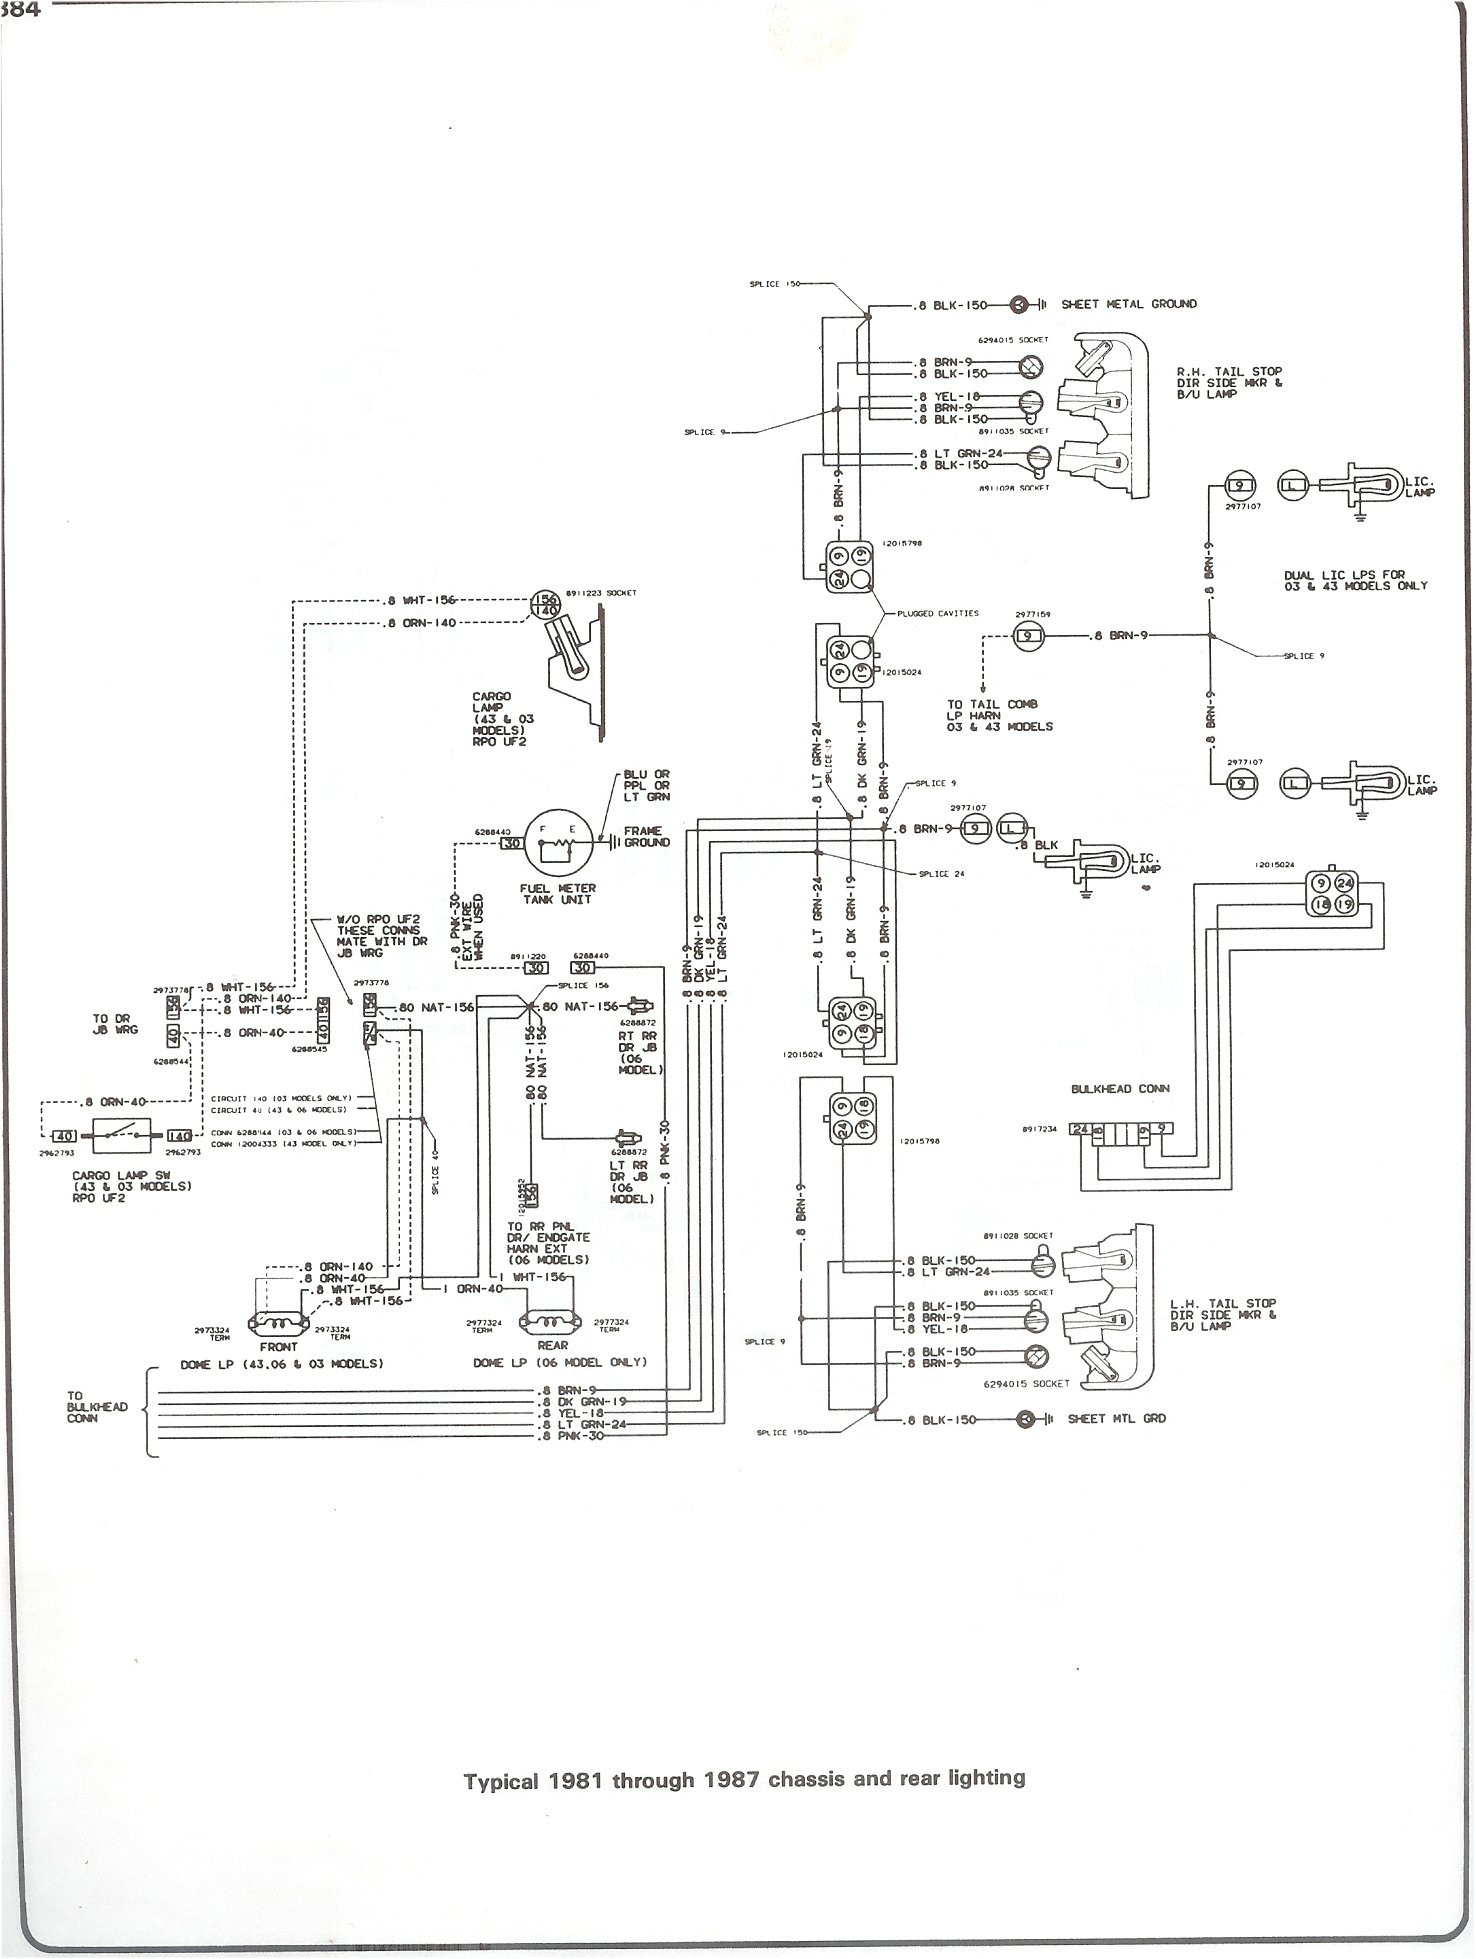 Wire Schmatic 1991 ford F150 Complete 73-87 Wiring Diagrams Of Wire Schmatic 1991 ford F150